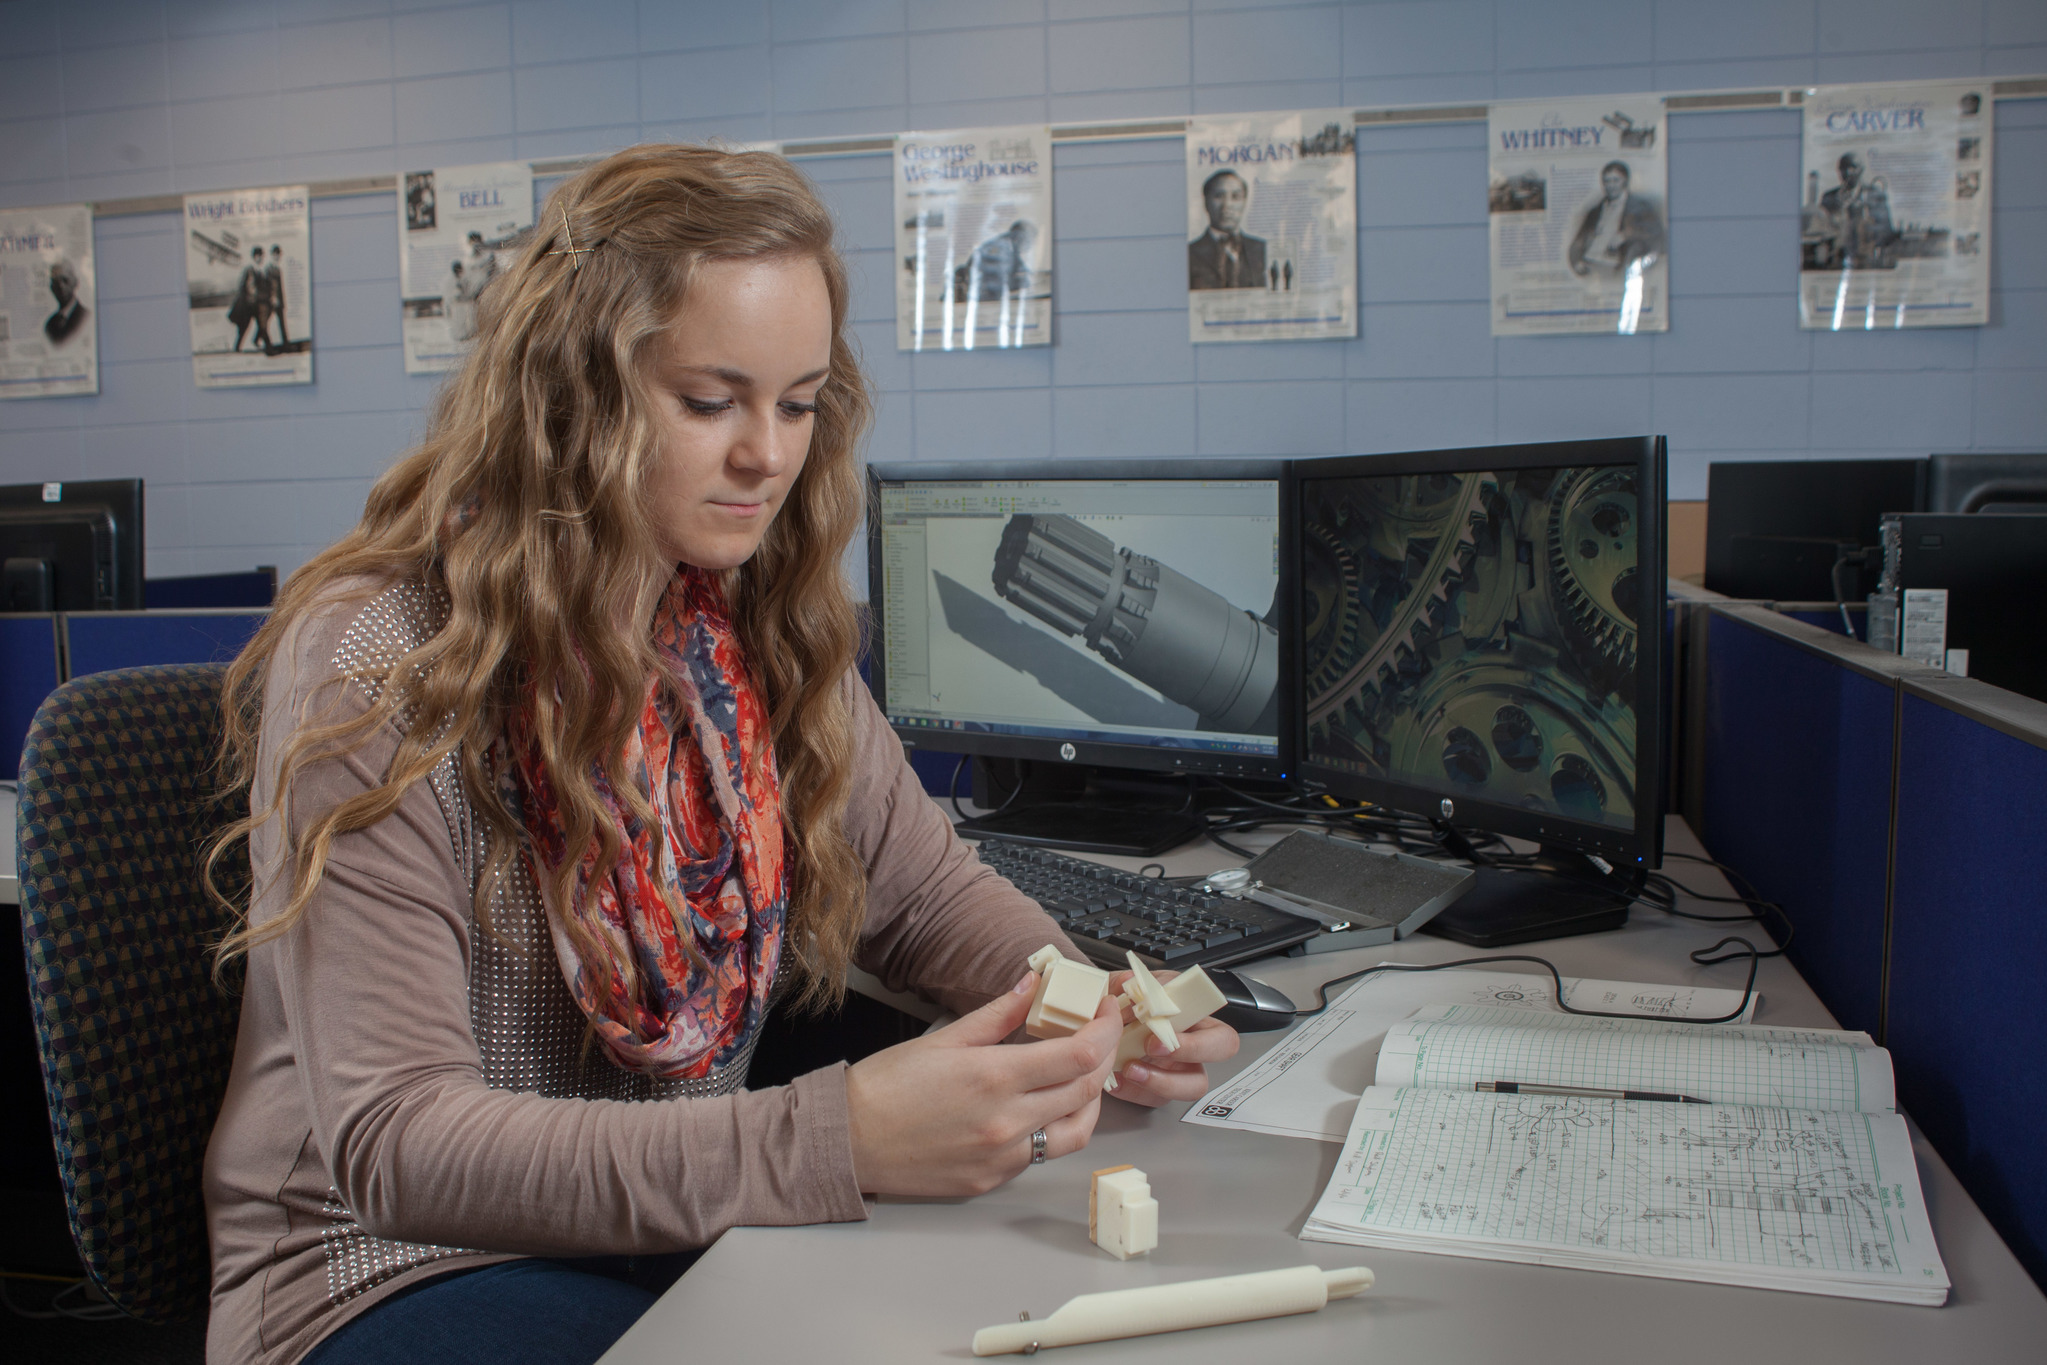 A female student is sitting at a workstation designing a part with technical images on the monitor screens behind her.